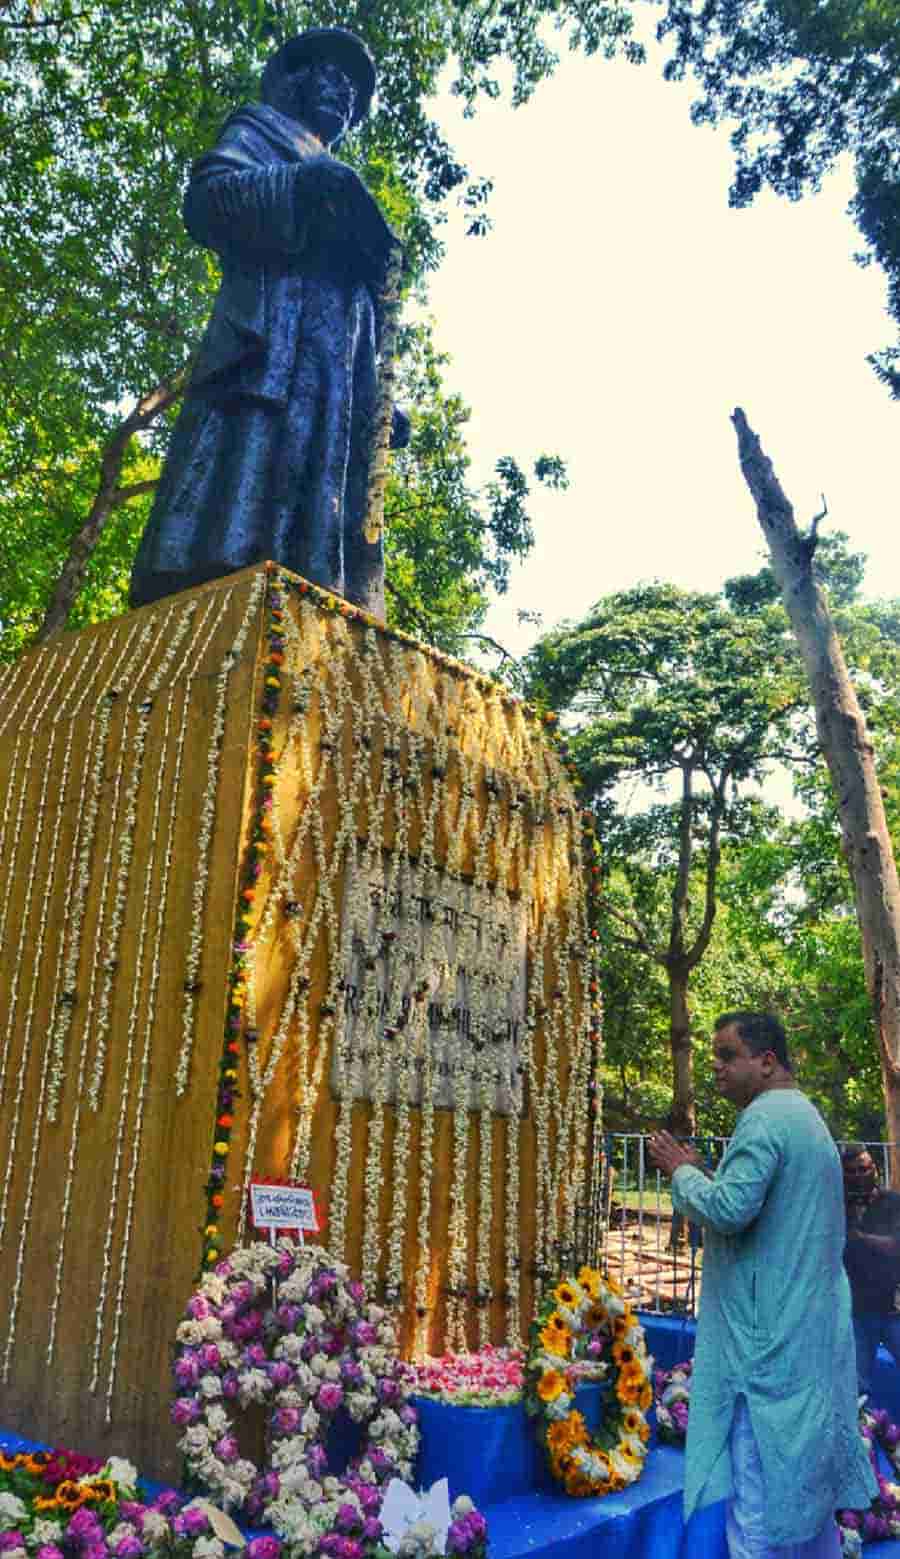 West Bengal education minister Bratya Basu paid tribute to Raja Rammohan Roy on the occasion of the reformer's 251st birth anniversary on Monday  